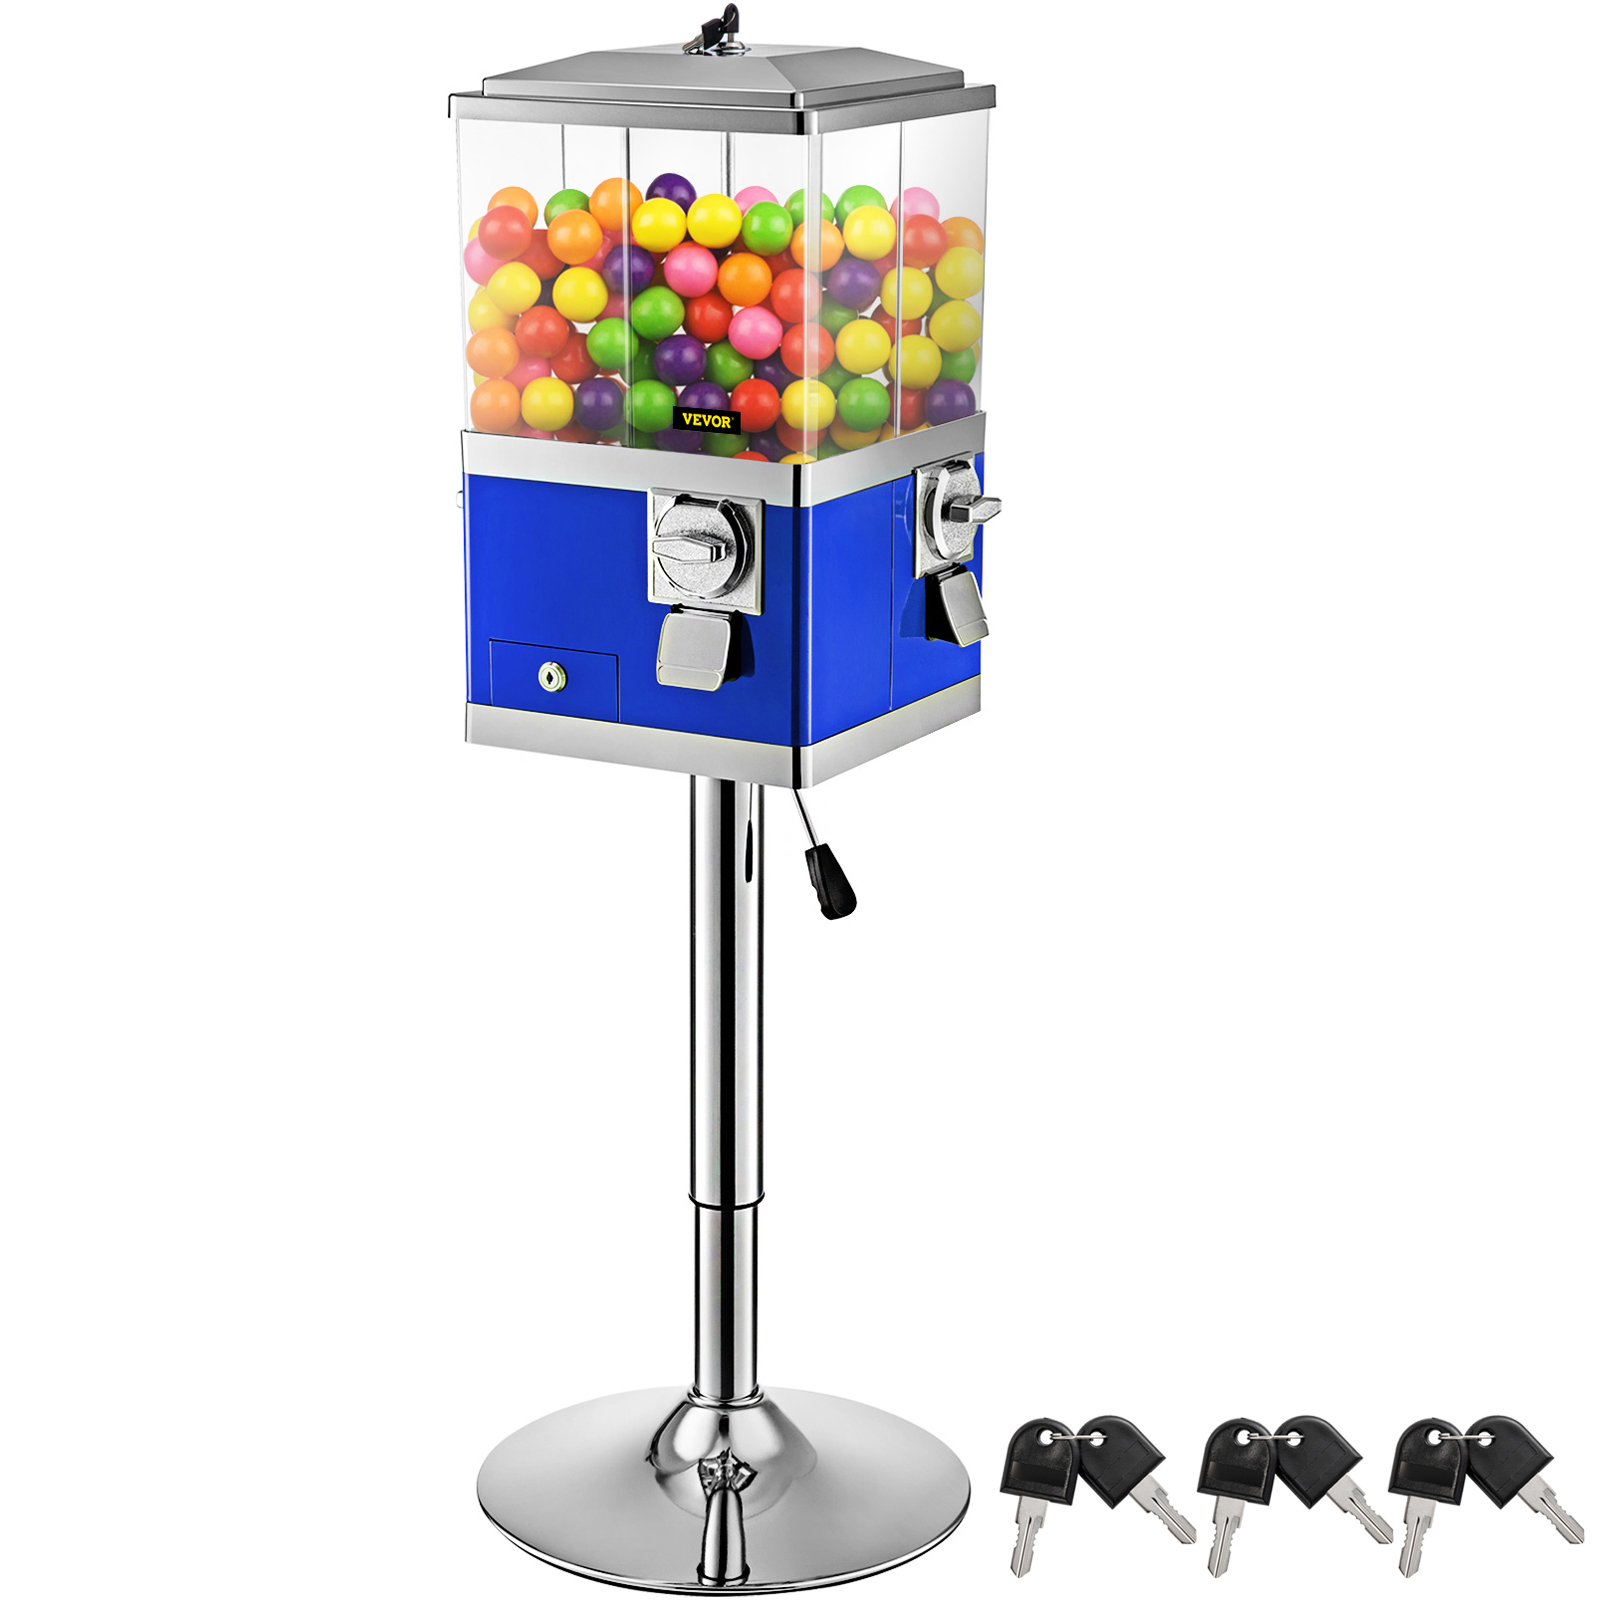 Vevor Gumball Machine Vintage Candy Dispenser With Iron Stand 41-50" Tall Blue от Vevor Many GEOs